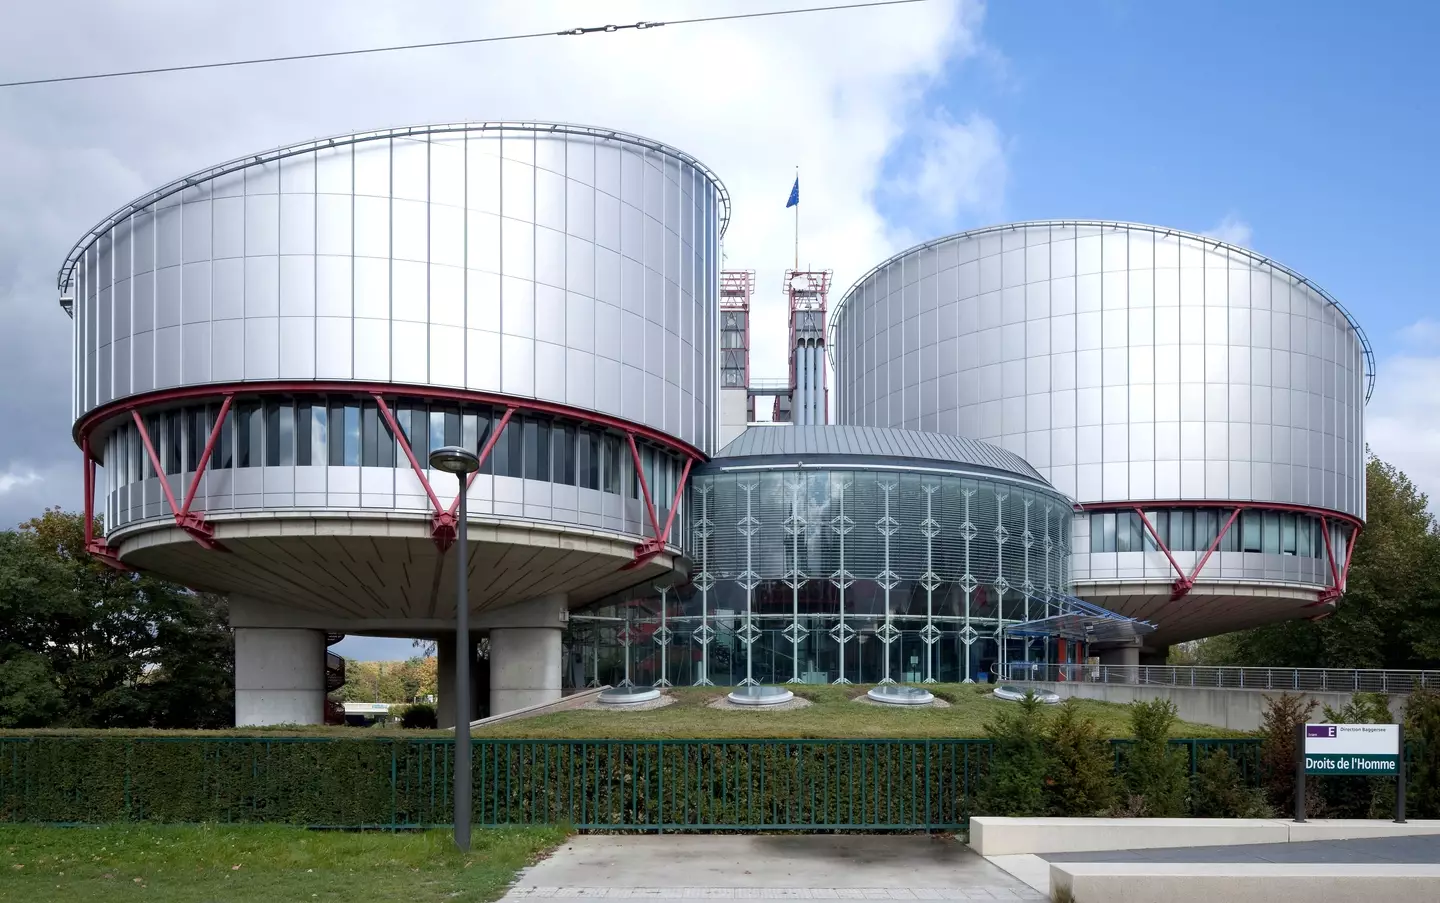 The family will file an application to the ECHR.